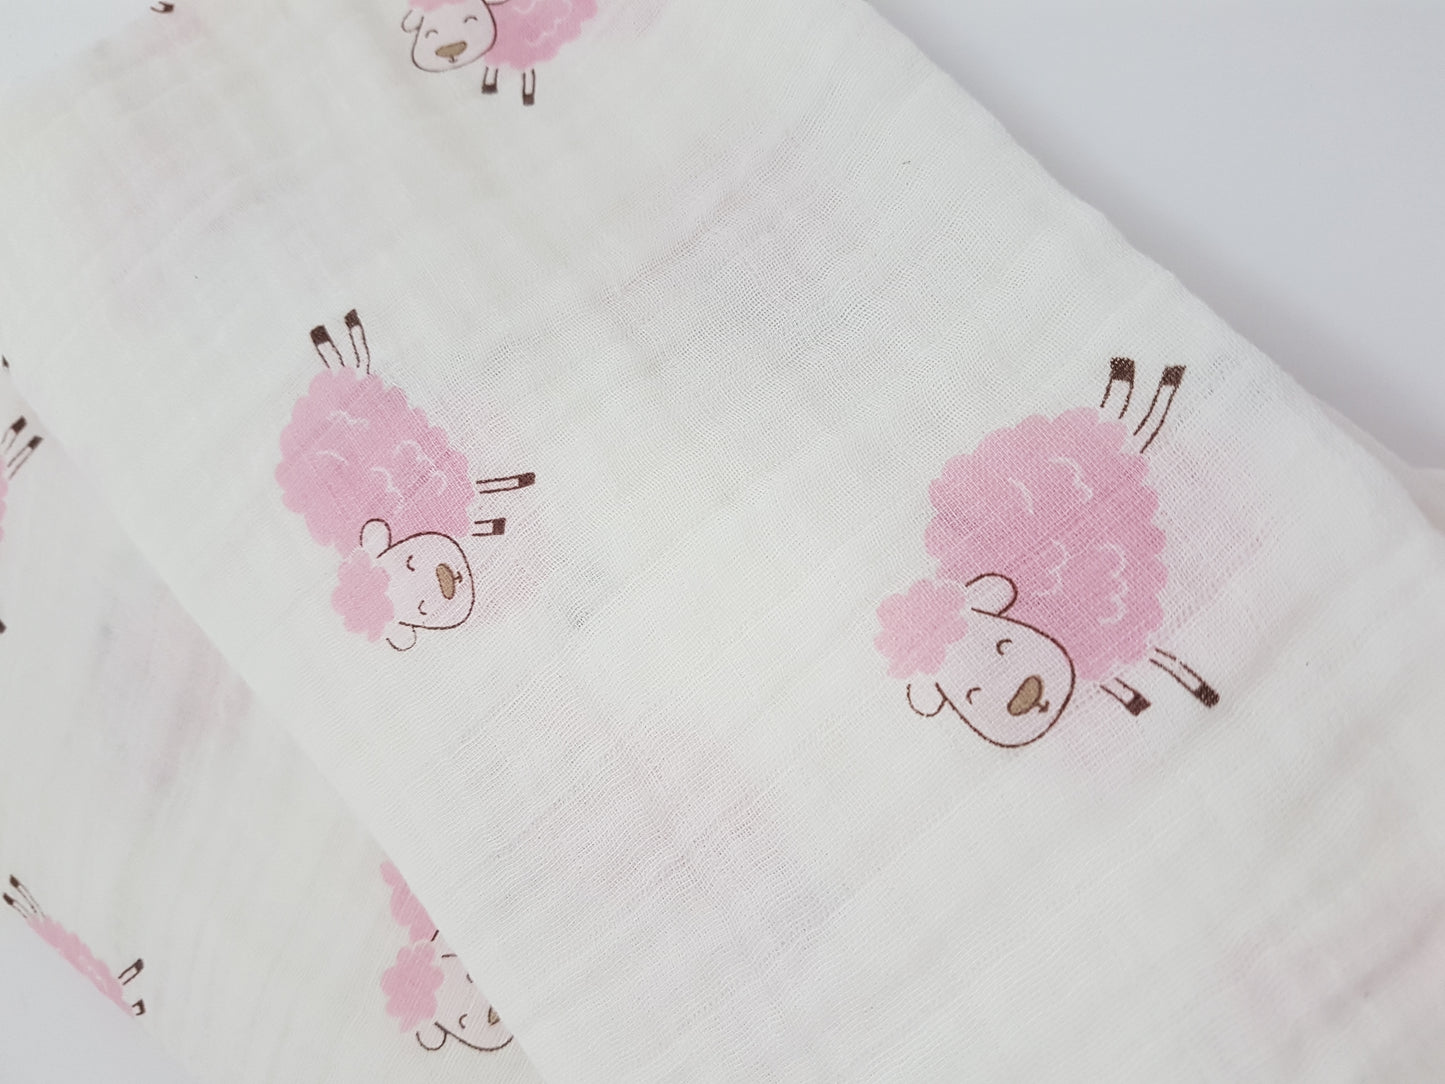 'Count the sheep!' 100% Cotton Swaddle